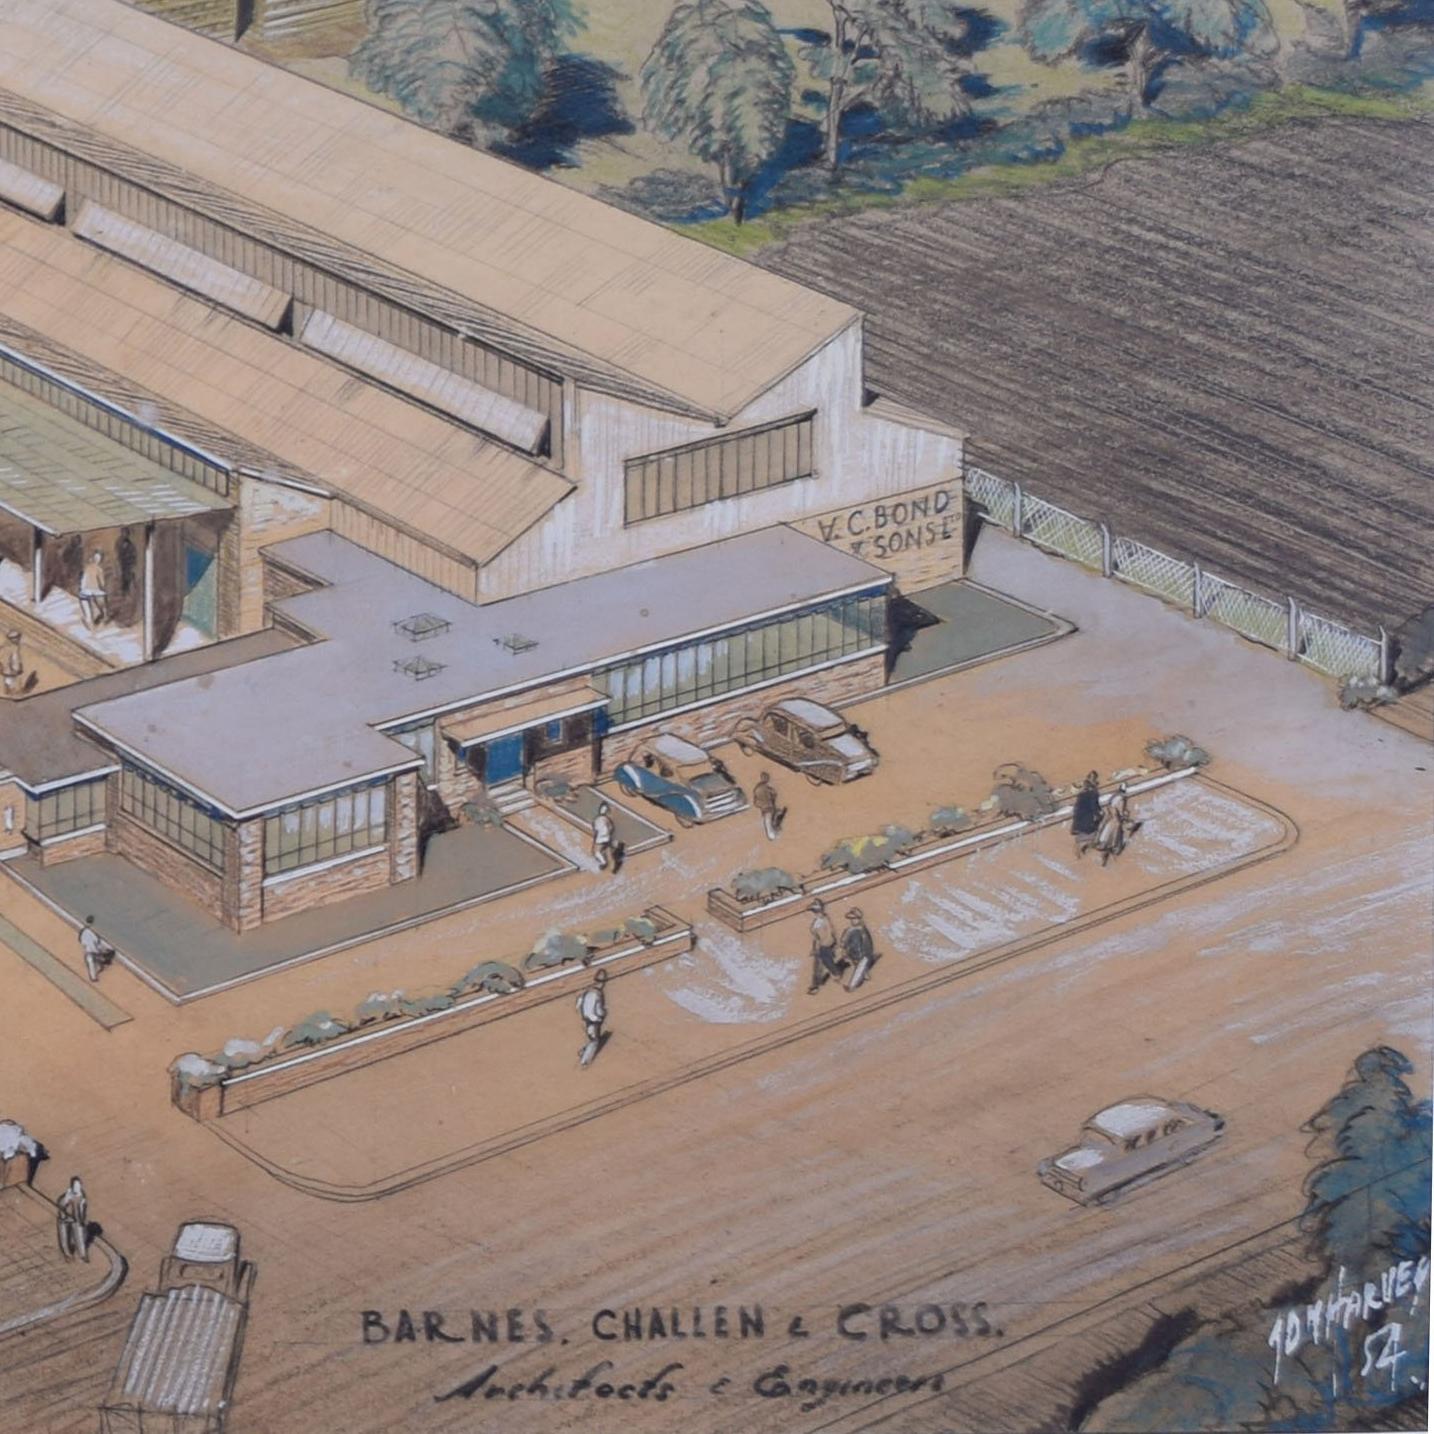 John Dean Monroe Harvey (1895 – 1978)
Design for a factory for VC Bond
for Barnes Challen & Cross, Architects and Engineers
Mixed media
38 x 68 cm

This design shows Harvey's skill at drawing fields; he carefully catches the texture of each ploughed